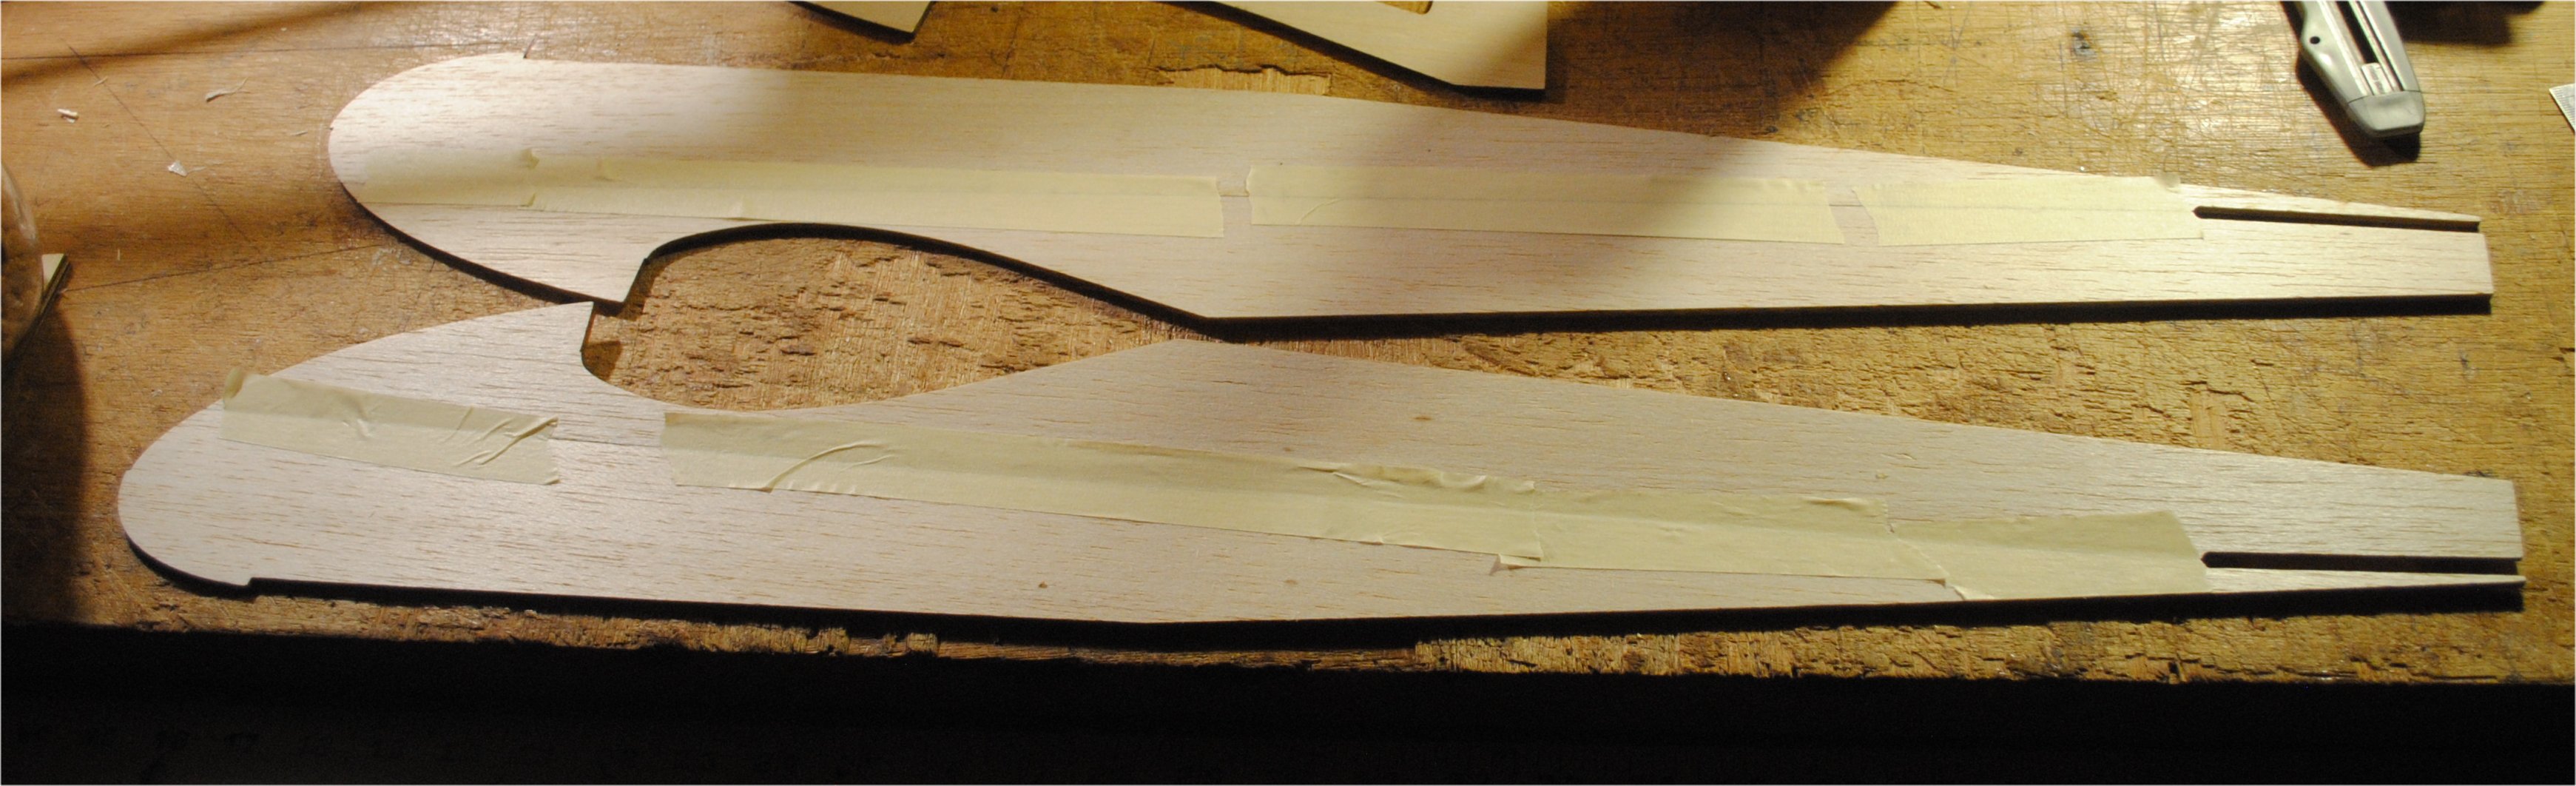 How To Edge Join Balsa Sheets The Balsa Workbench